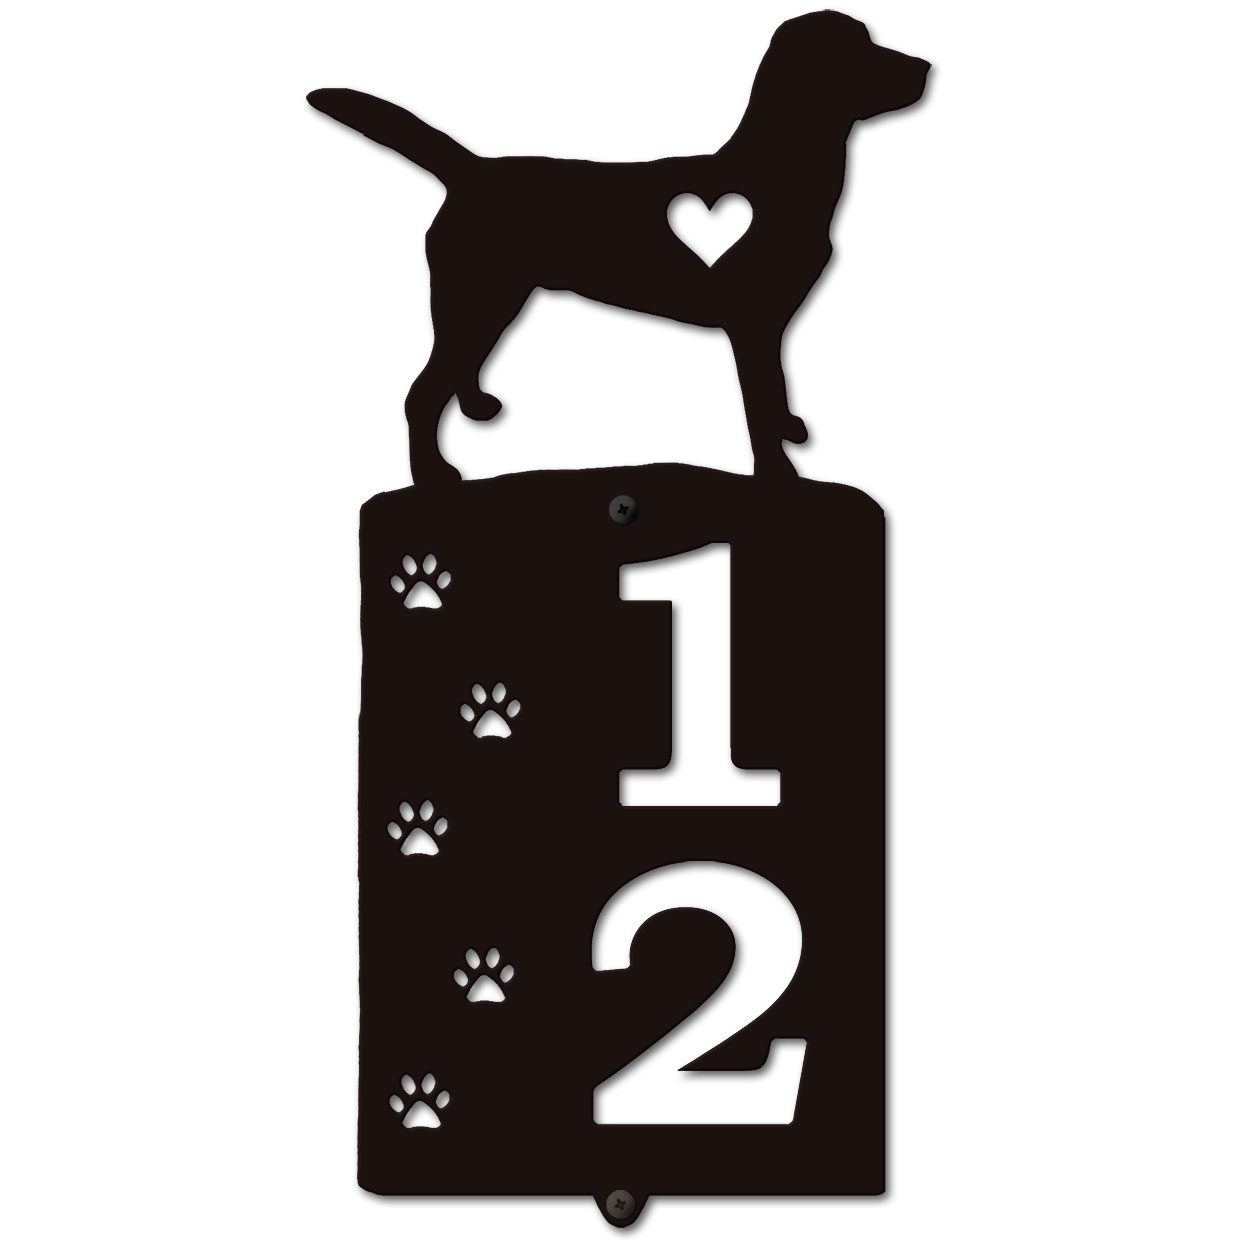 636262 - Labrador Cut Outs Two Digit Address Number Plaque